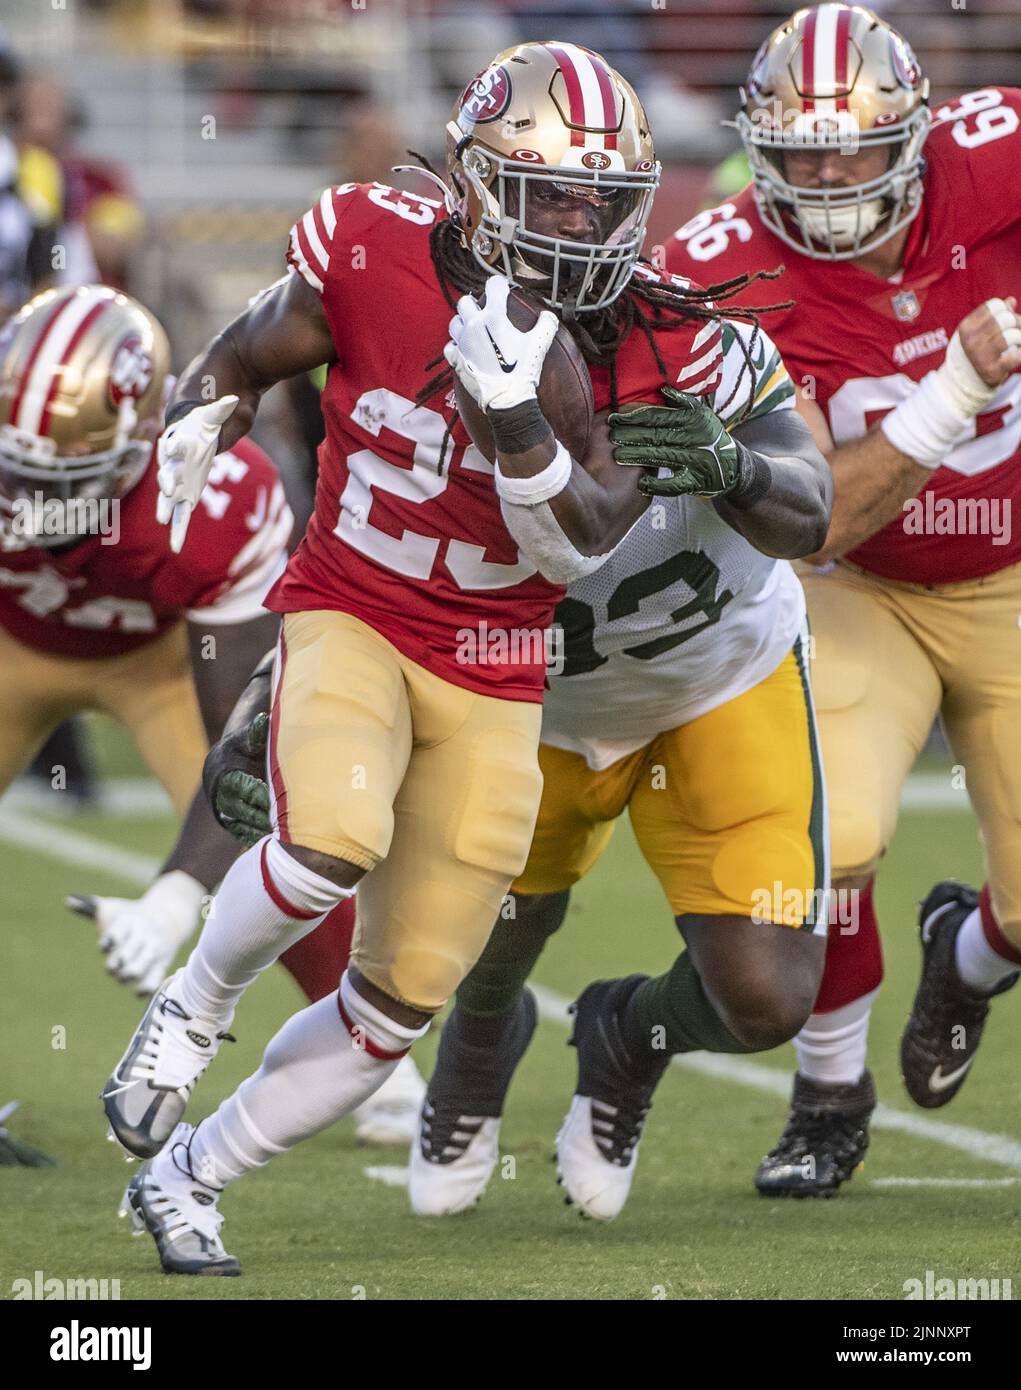 Santa Clara, USA. 13th Aug, 2022. San Francisco 49ers running back JaMycal Hasty (23) runs against the Green Bay Packers in the second quarter at Levi's Stadium in Santa Clara, California on Friday, August 12, 2022. The 49ers defeated the Packers 28-21 in their first preseason game Photo by Terry Schmitt/UPI Credit: UPI/Alamy Live News Stock Photo